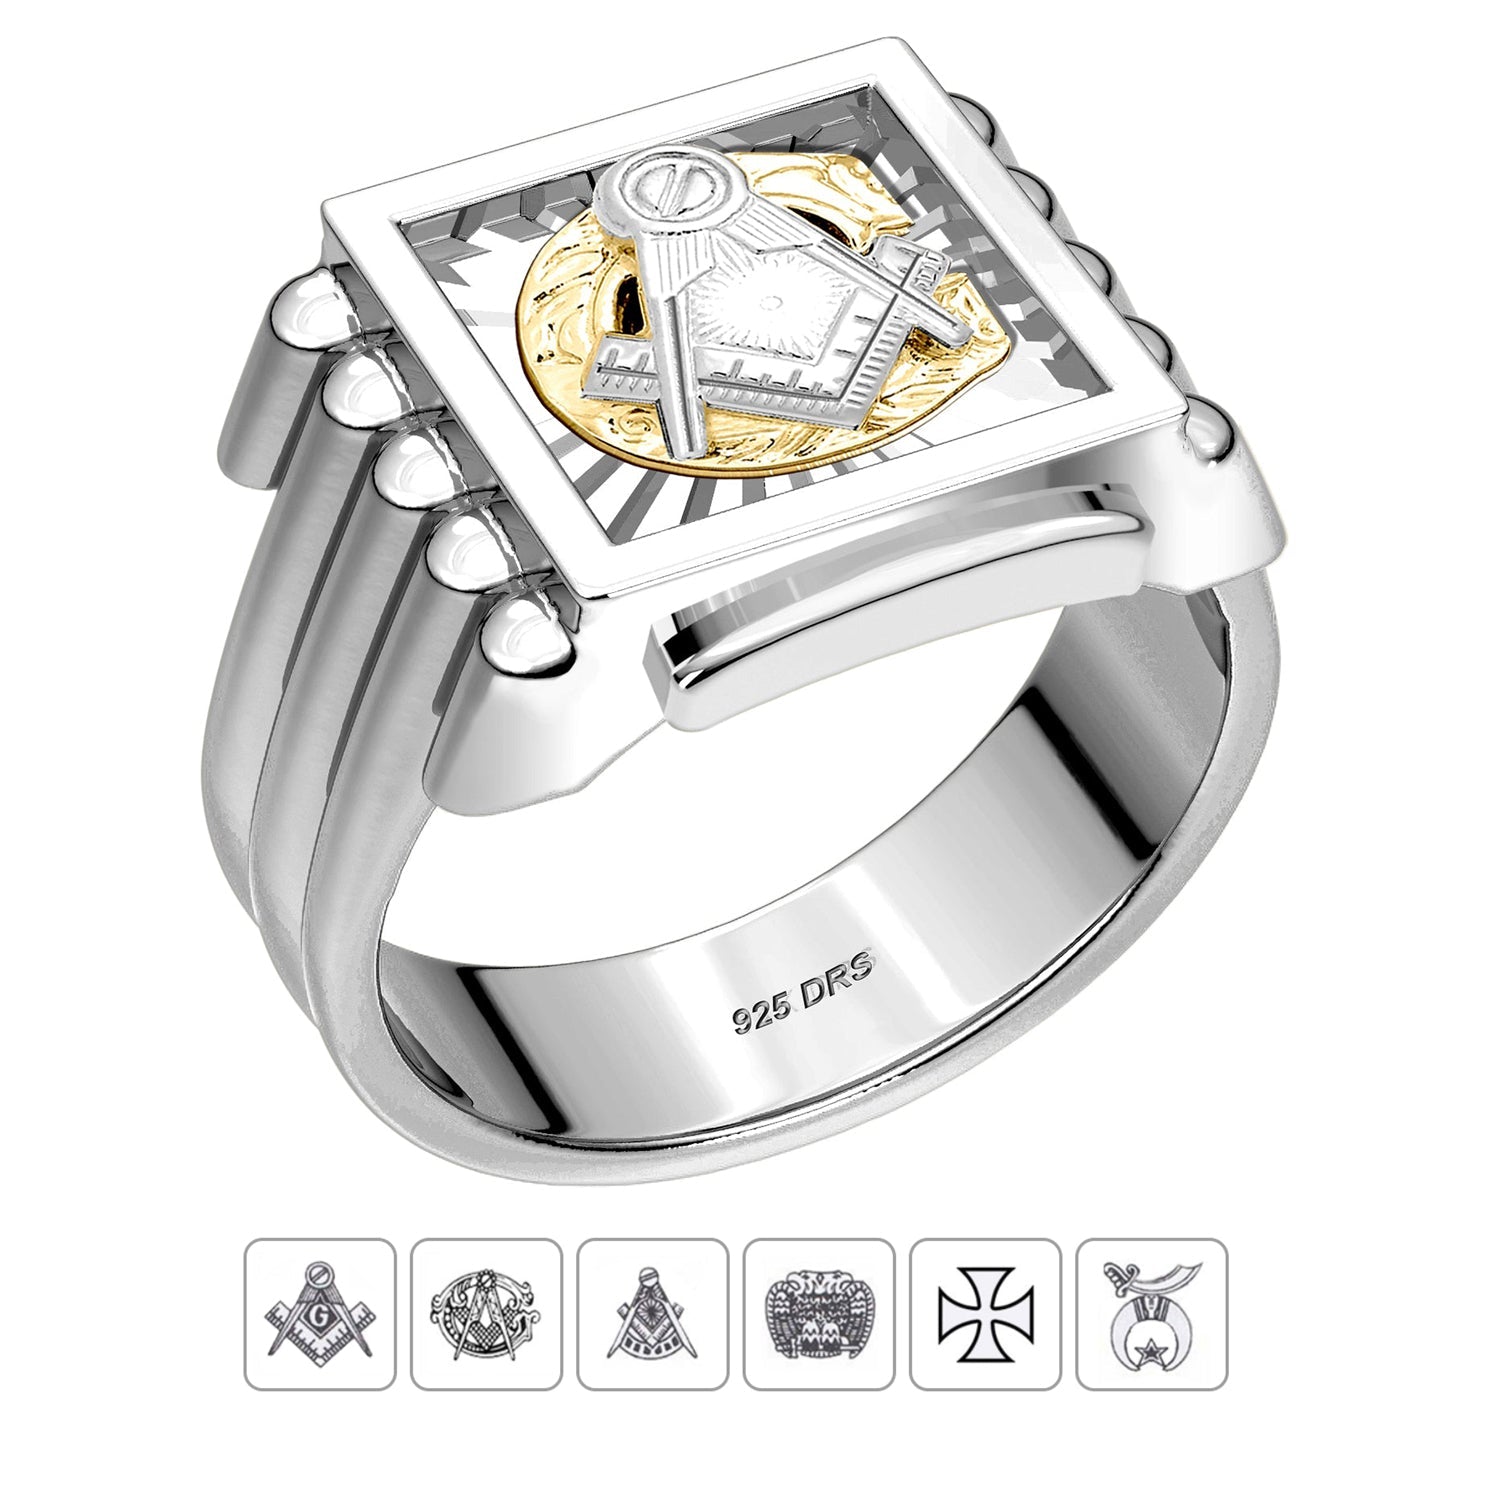 US Jewels Men's 925 Sterling Silver with Optional 10k or 14k Gold Masonic Rings - US Jewels